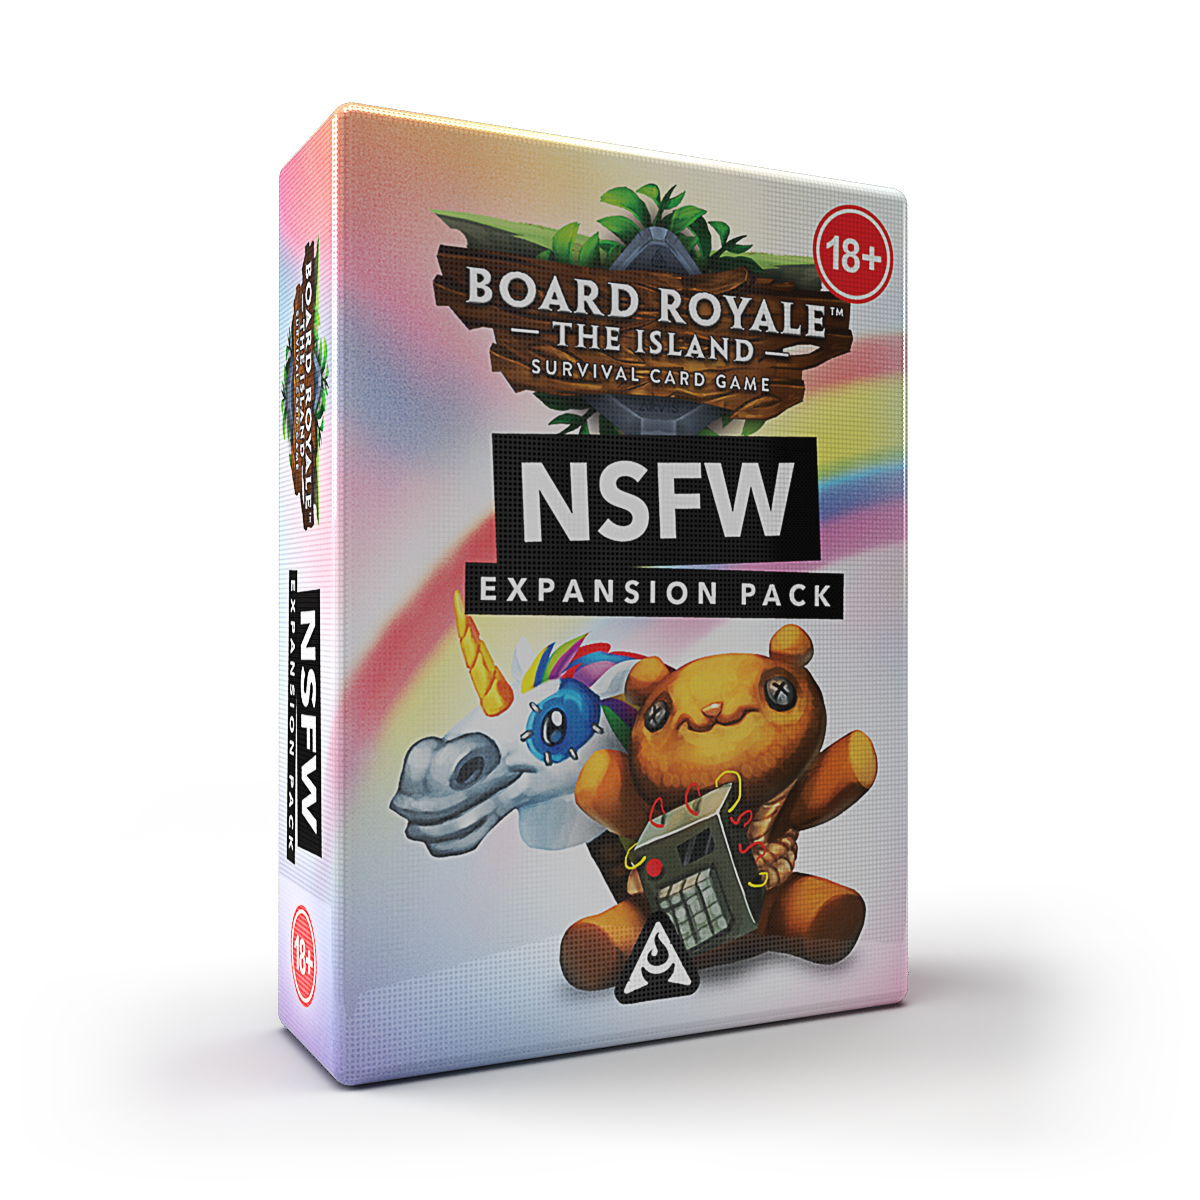 Board Royale - NSFW Expansion Pack